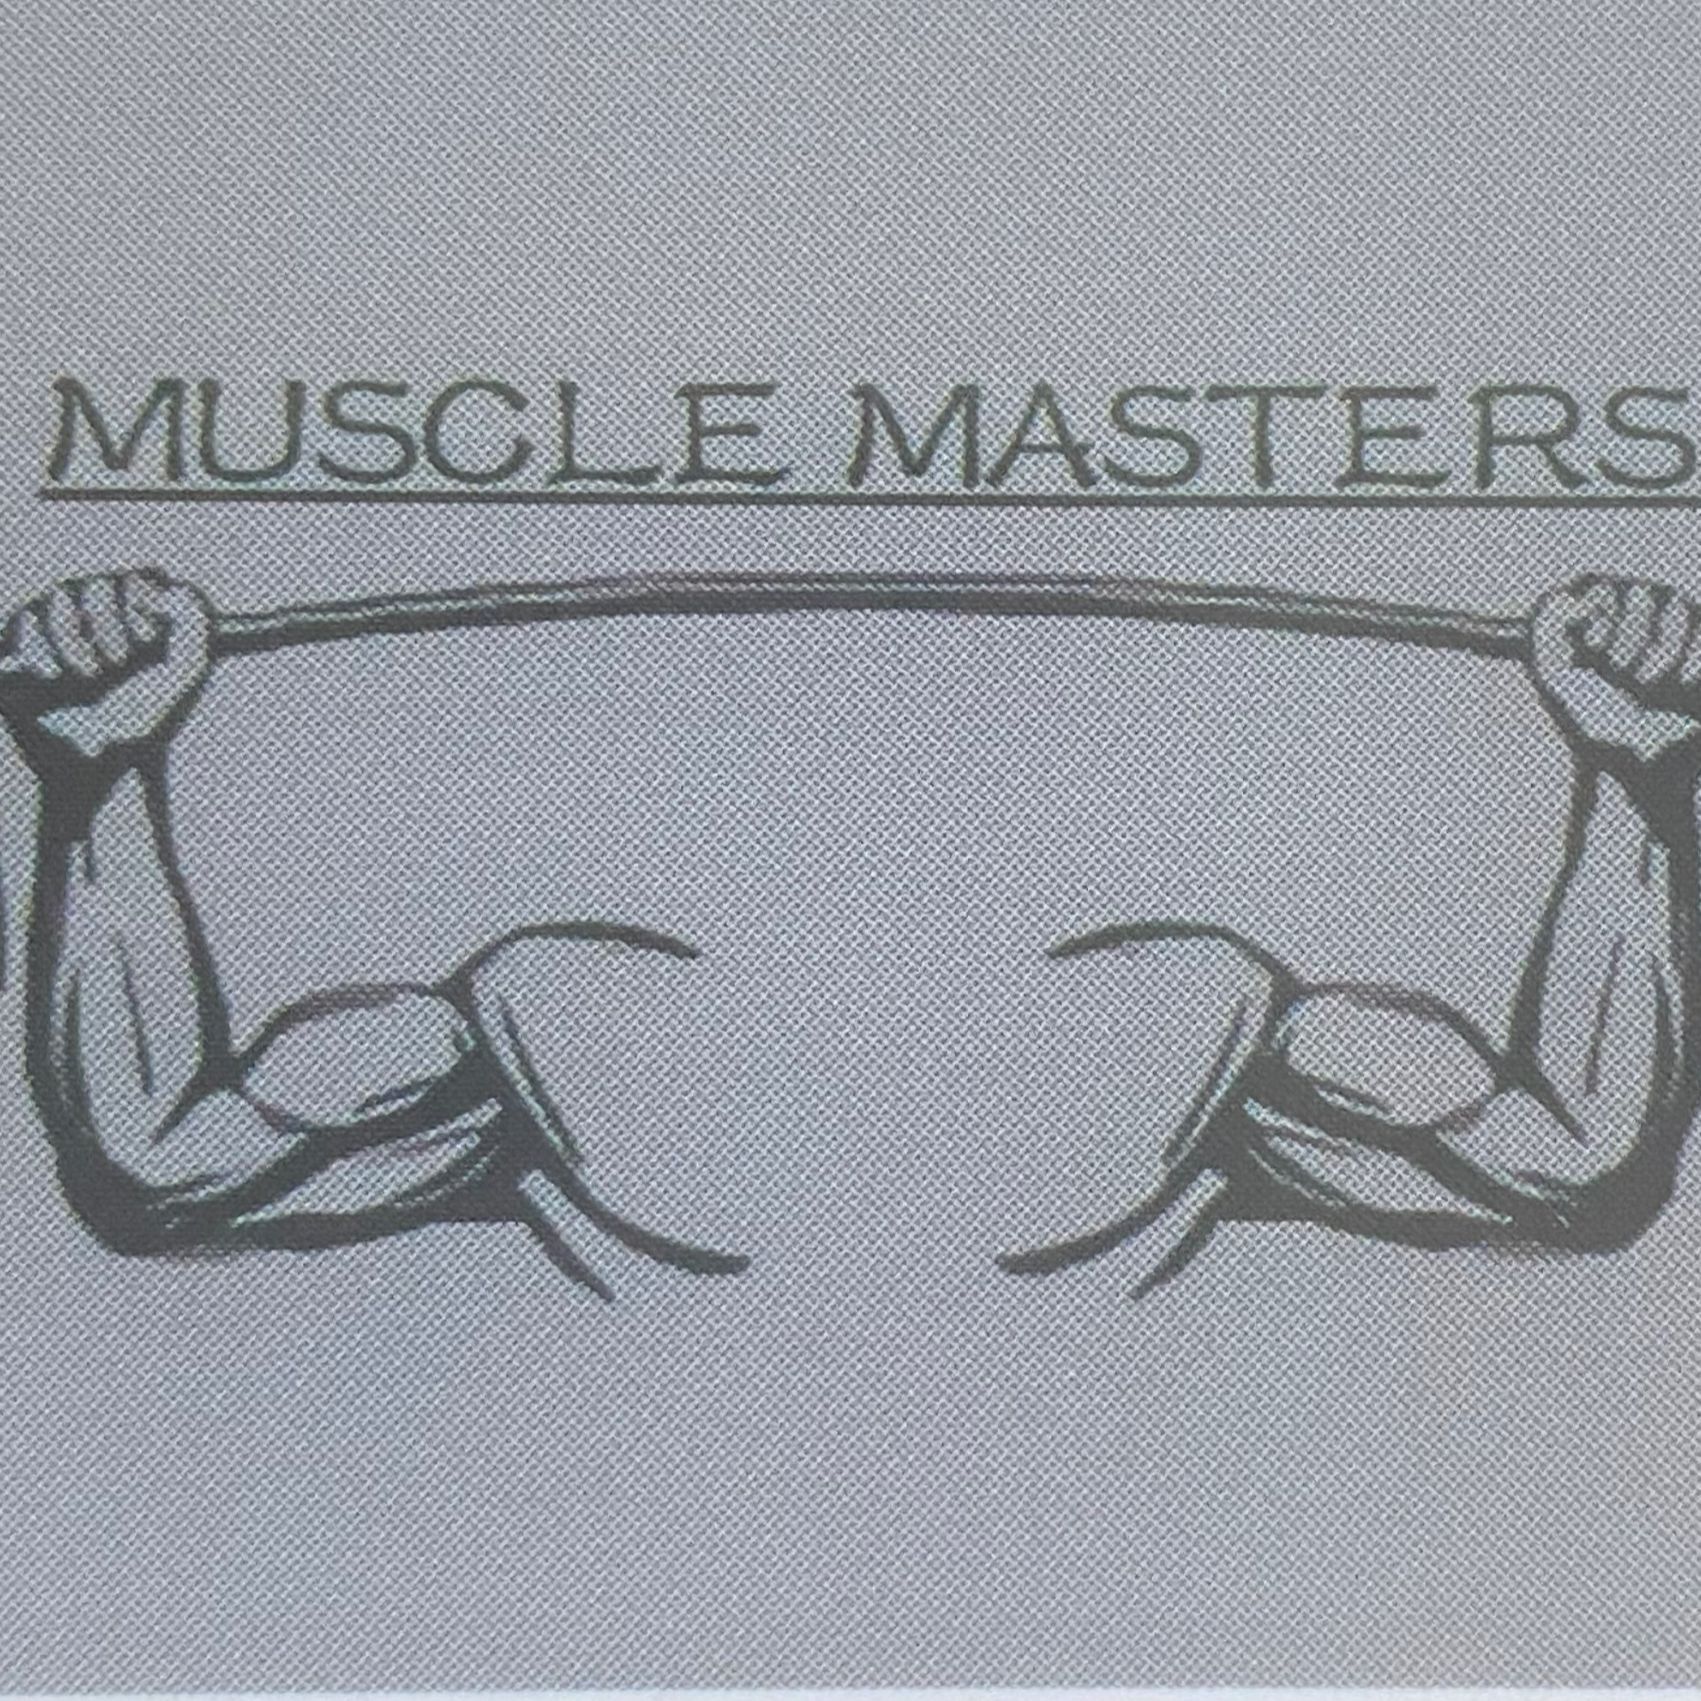 MuscleMasters Massage and Waxing Studio for Men, 1639 Post Rd, Warwick, 02888